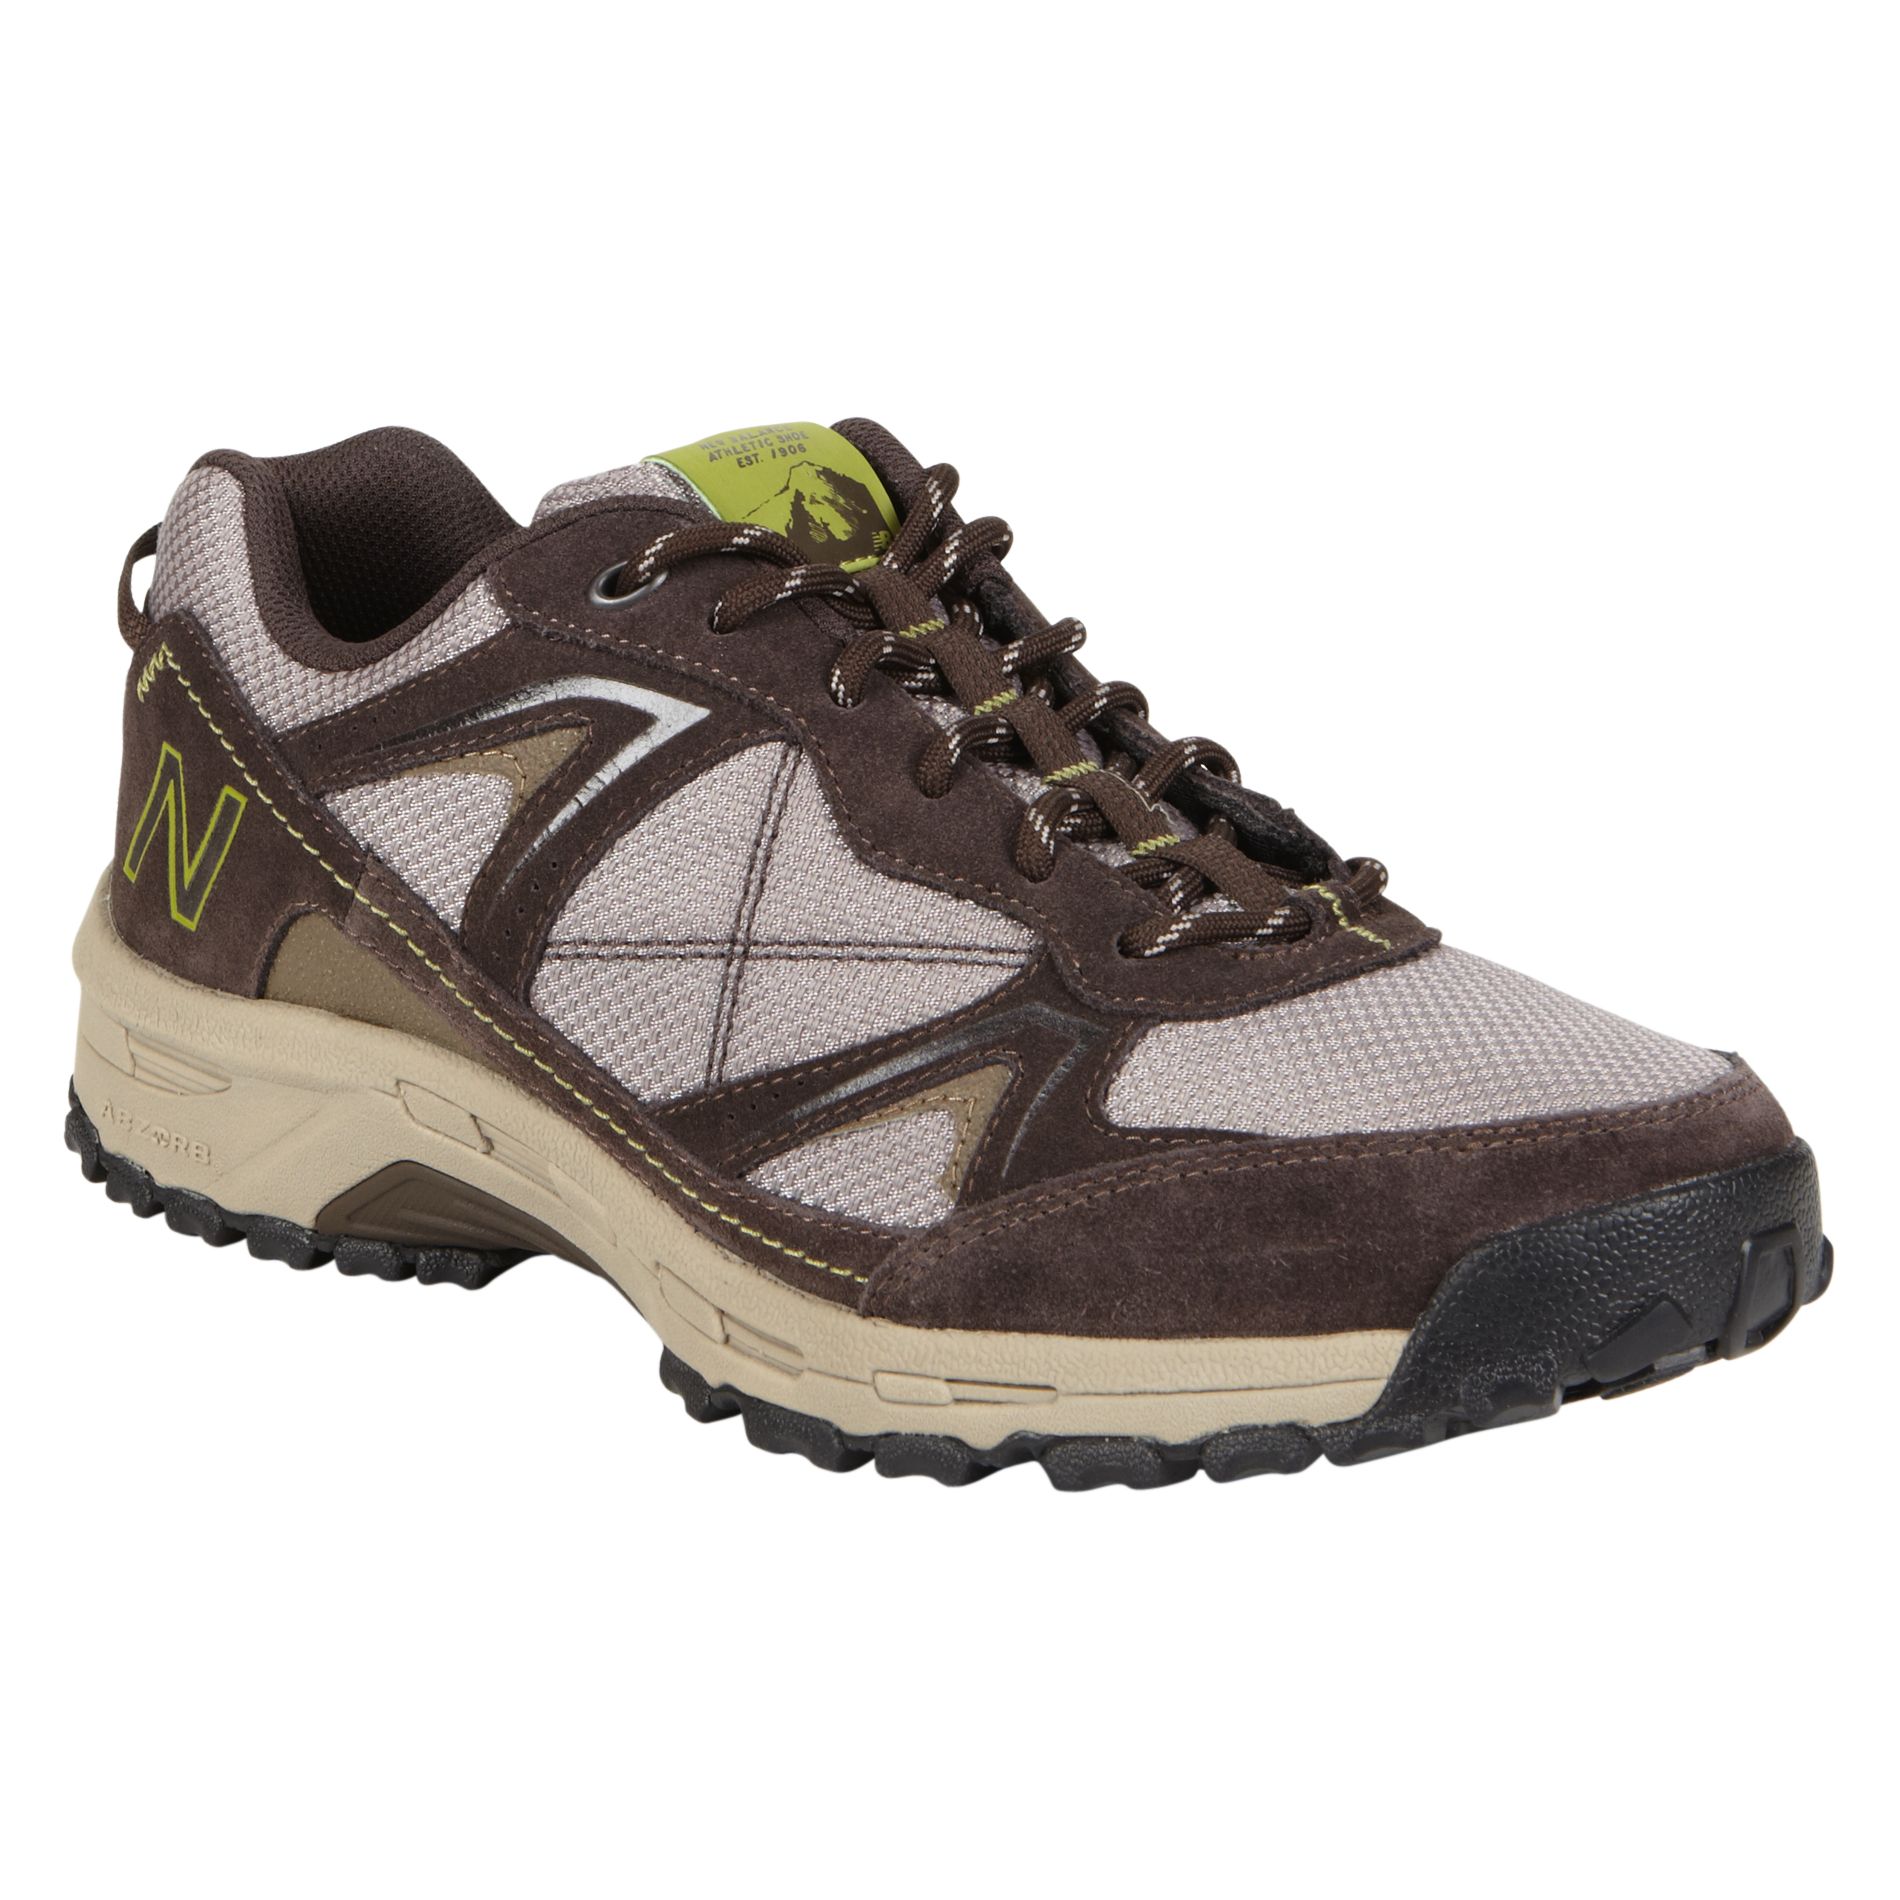 New Balance Men's 659 Country Walking Athletic Shoe Wide Width - Brown